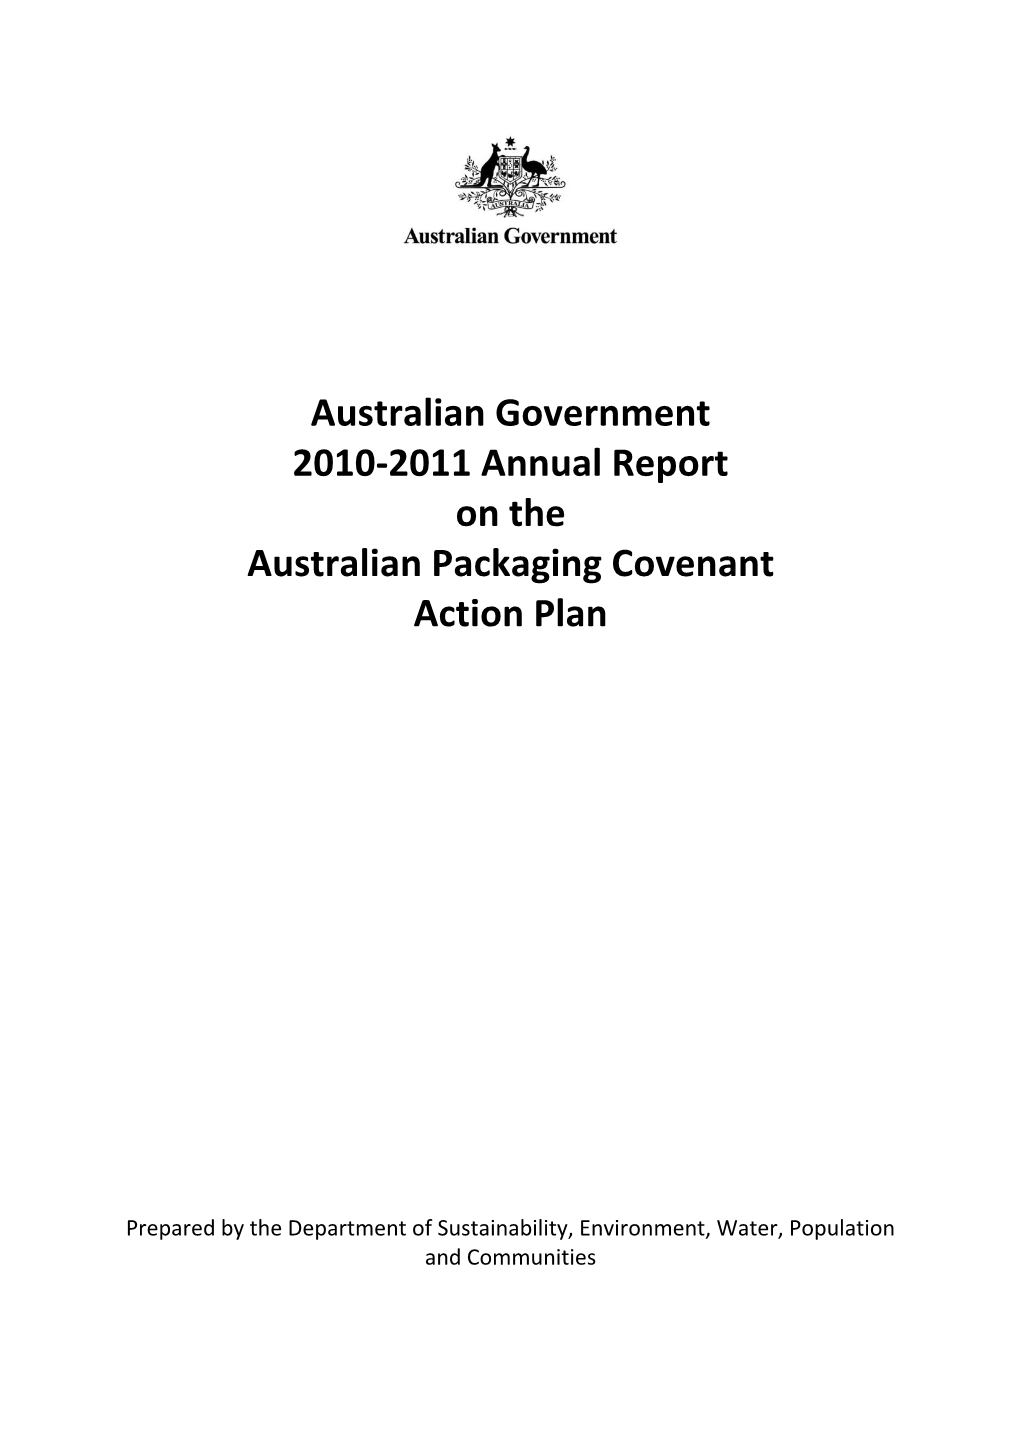 Australian Government 2010-2011 Annual Report on the Australian Packaging Covenant Action Plan